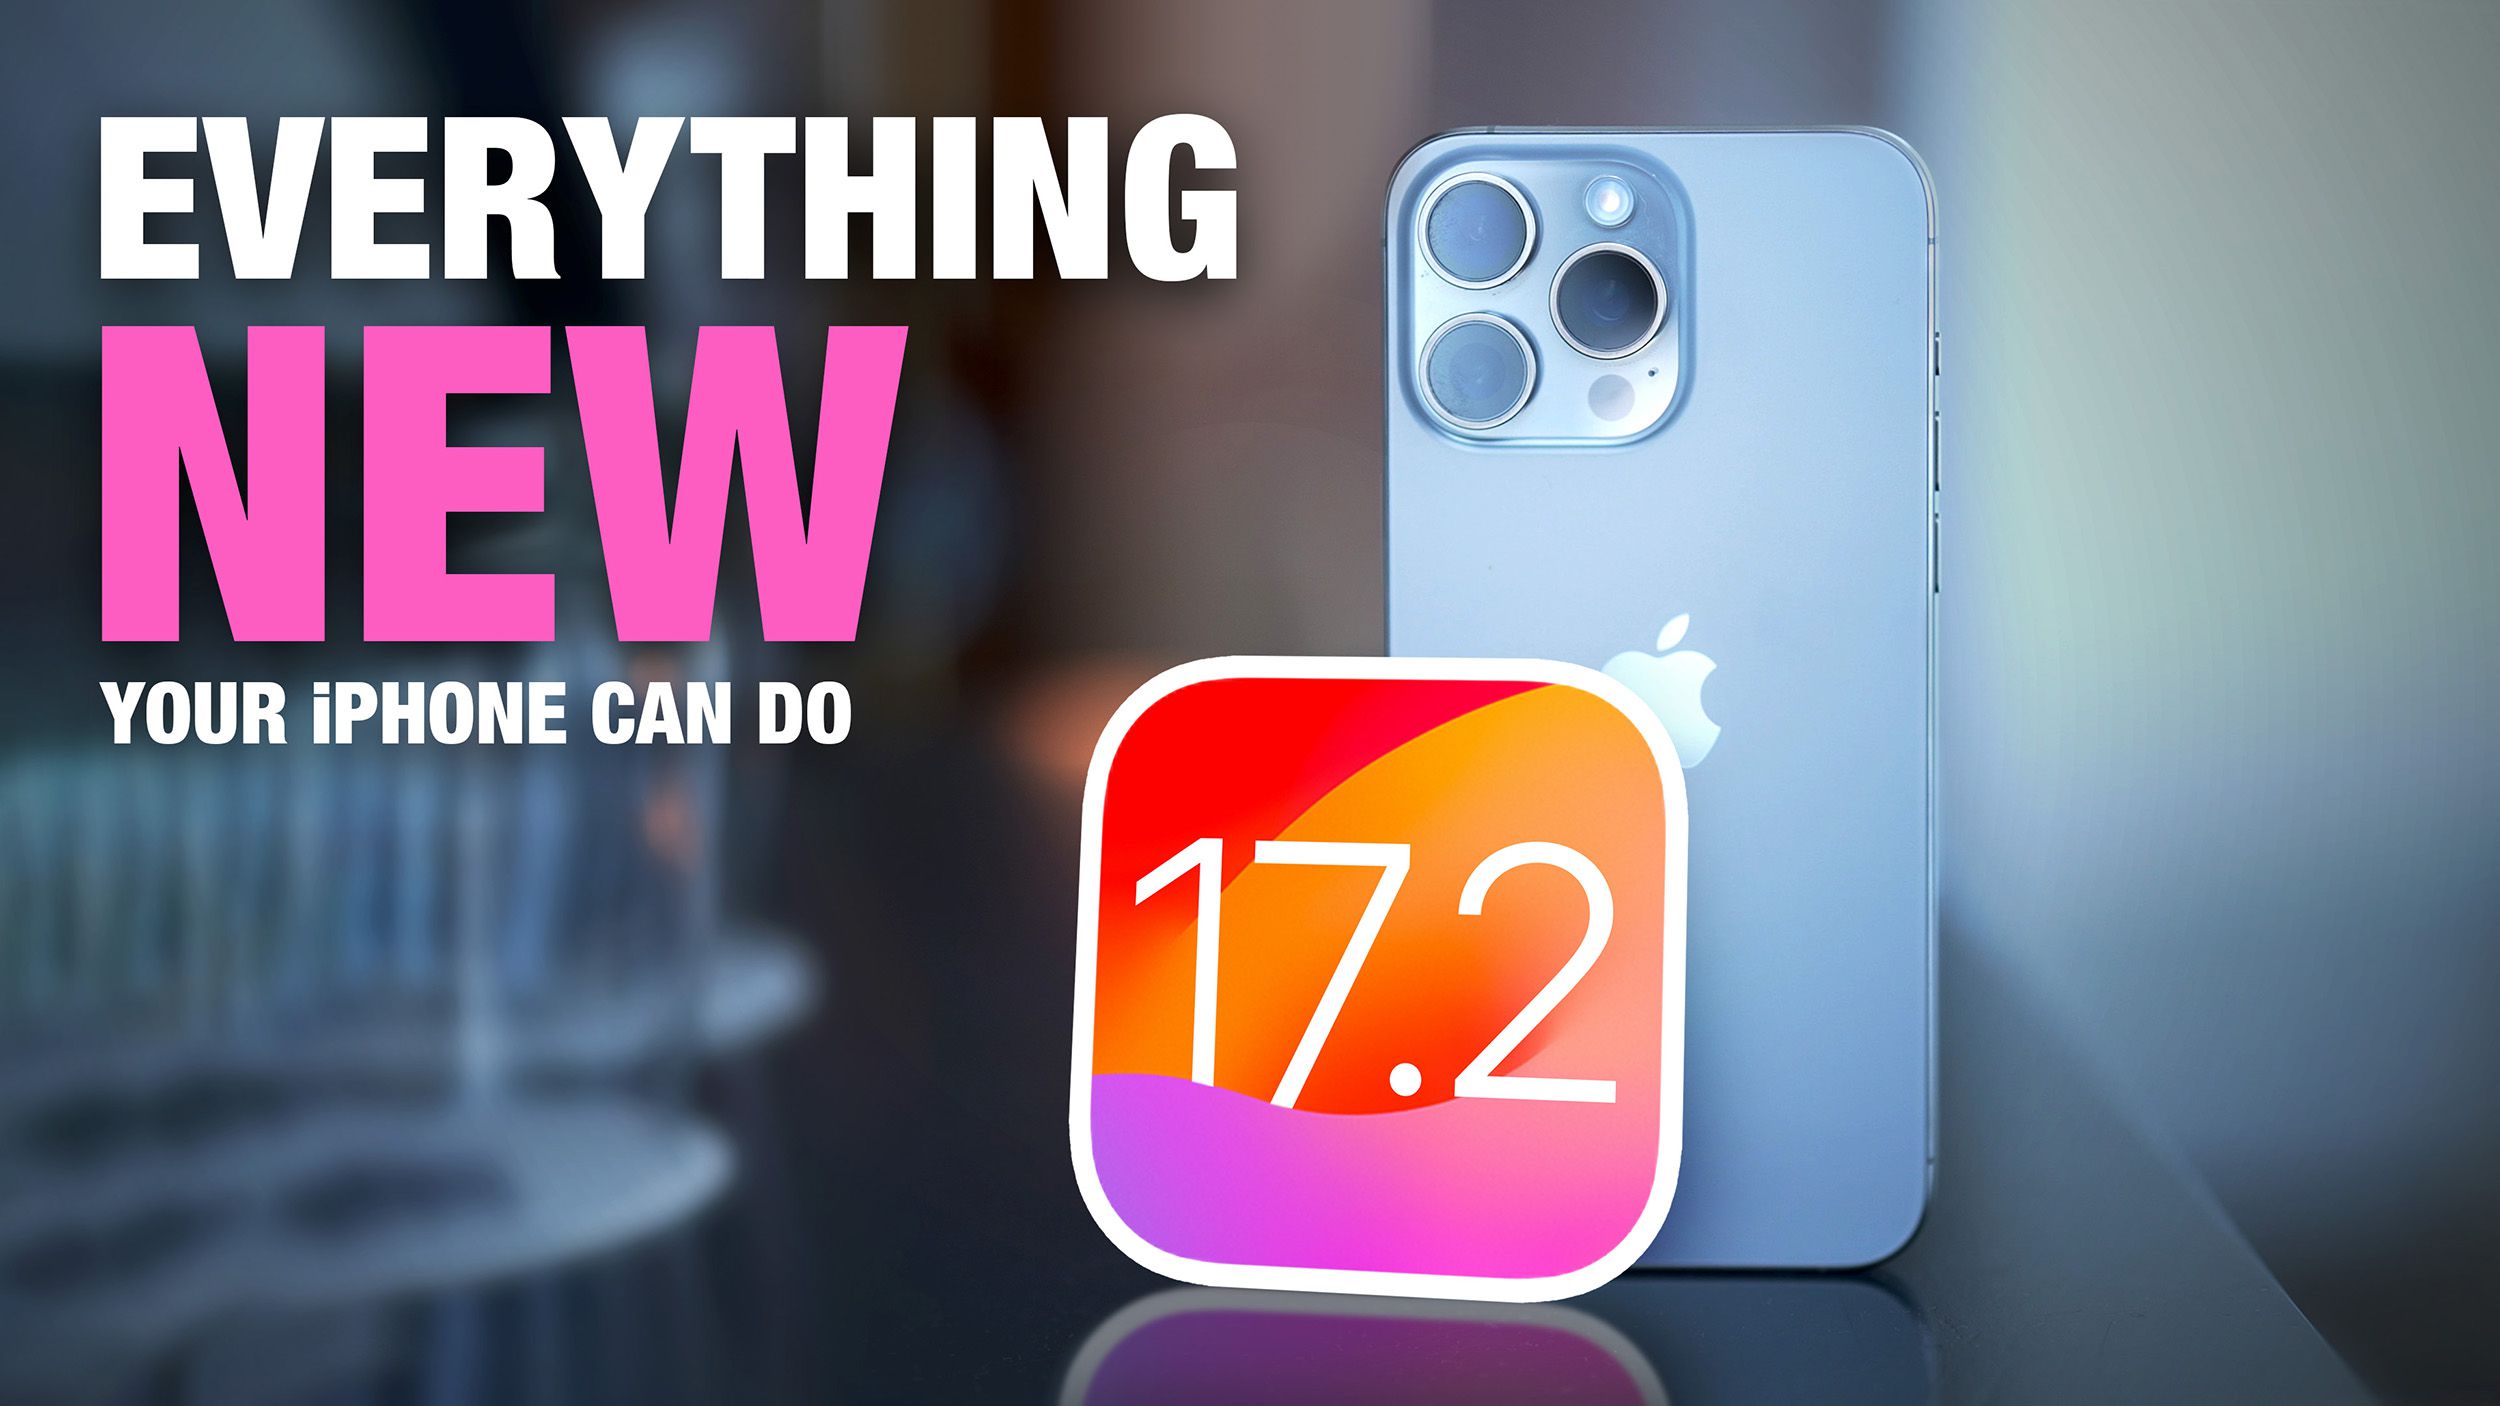 27 New Things Your iPhone Can Do With This Month’s iOS 17.2 Update